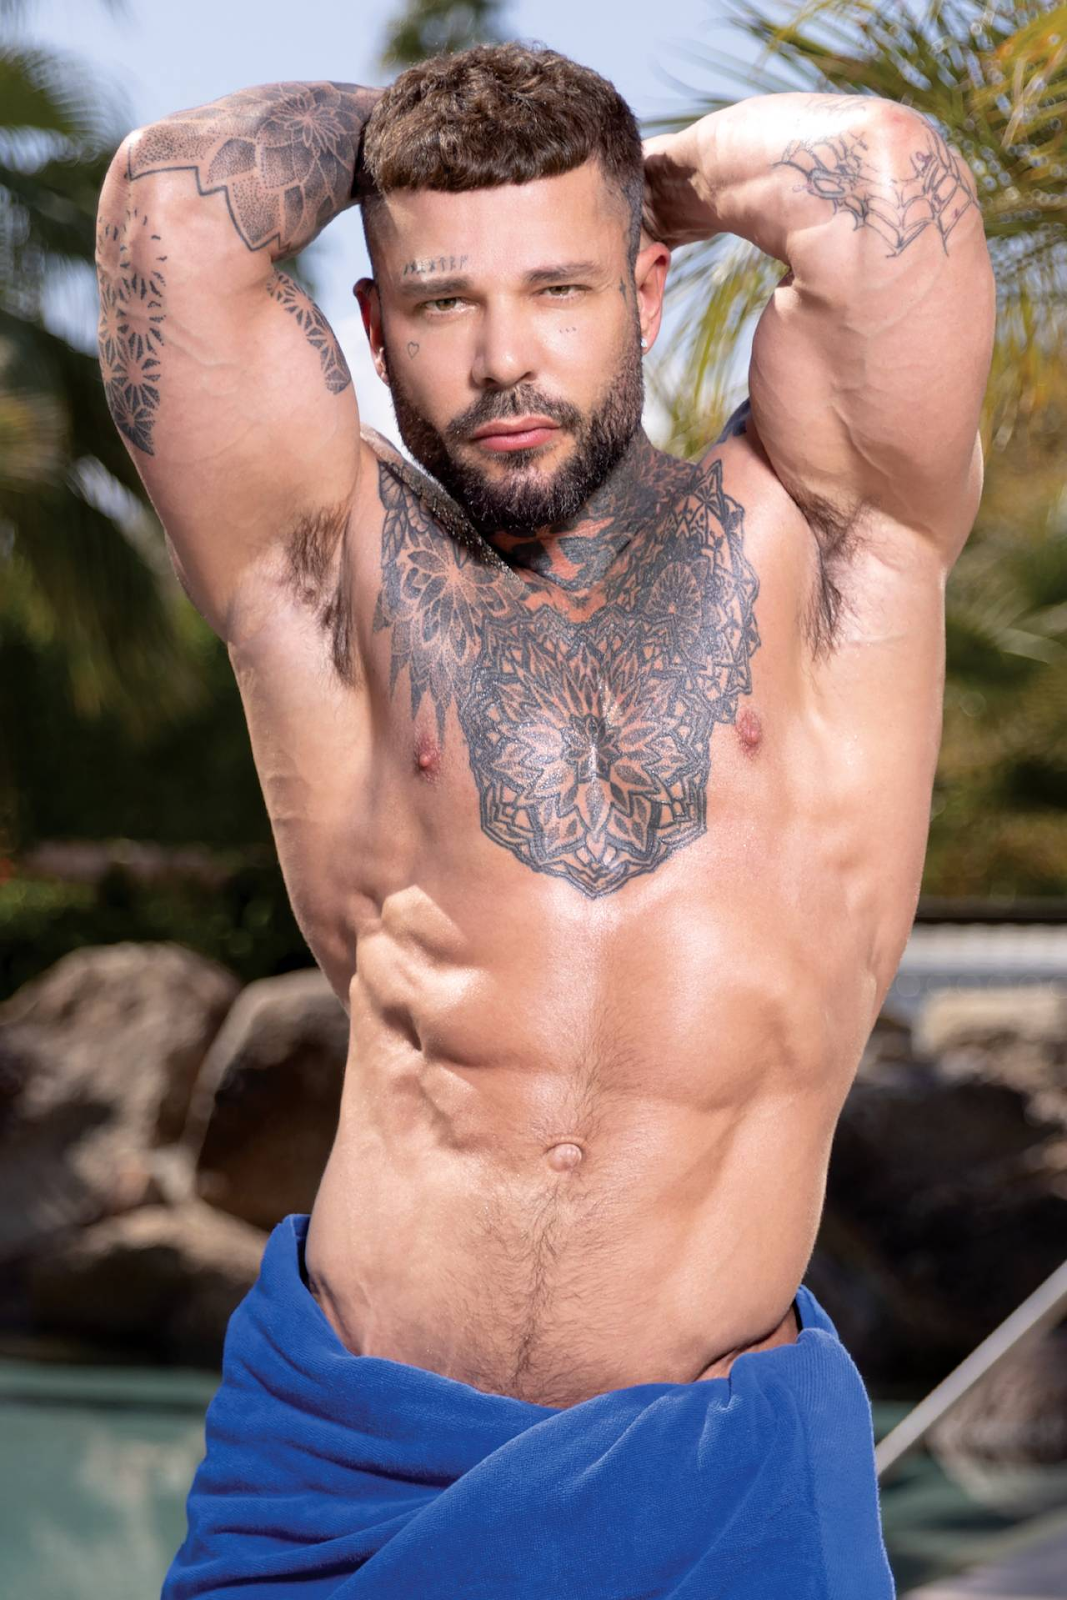 Danny Starr posing and wearing a blue towel with his hands behind his back for a promotional gay porn still